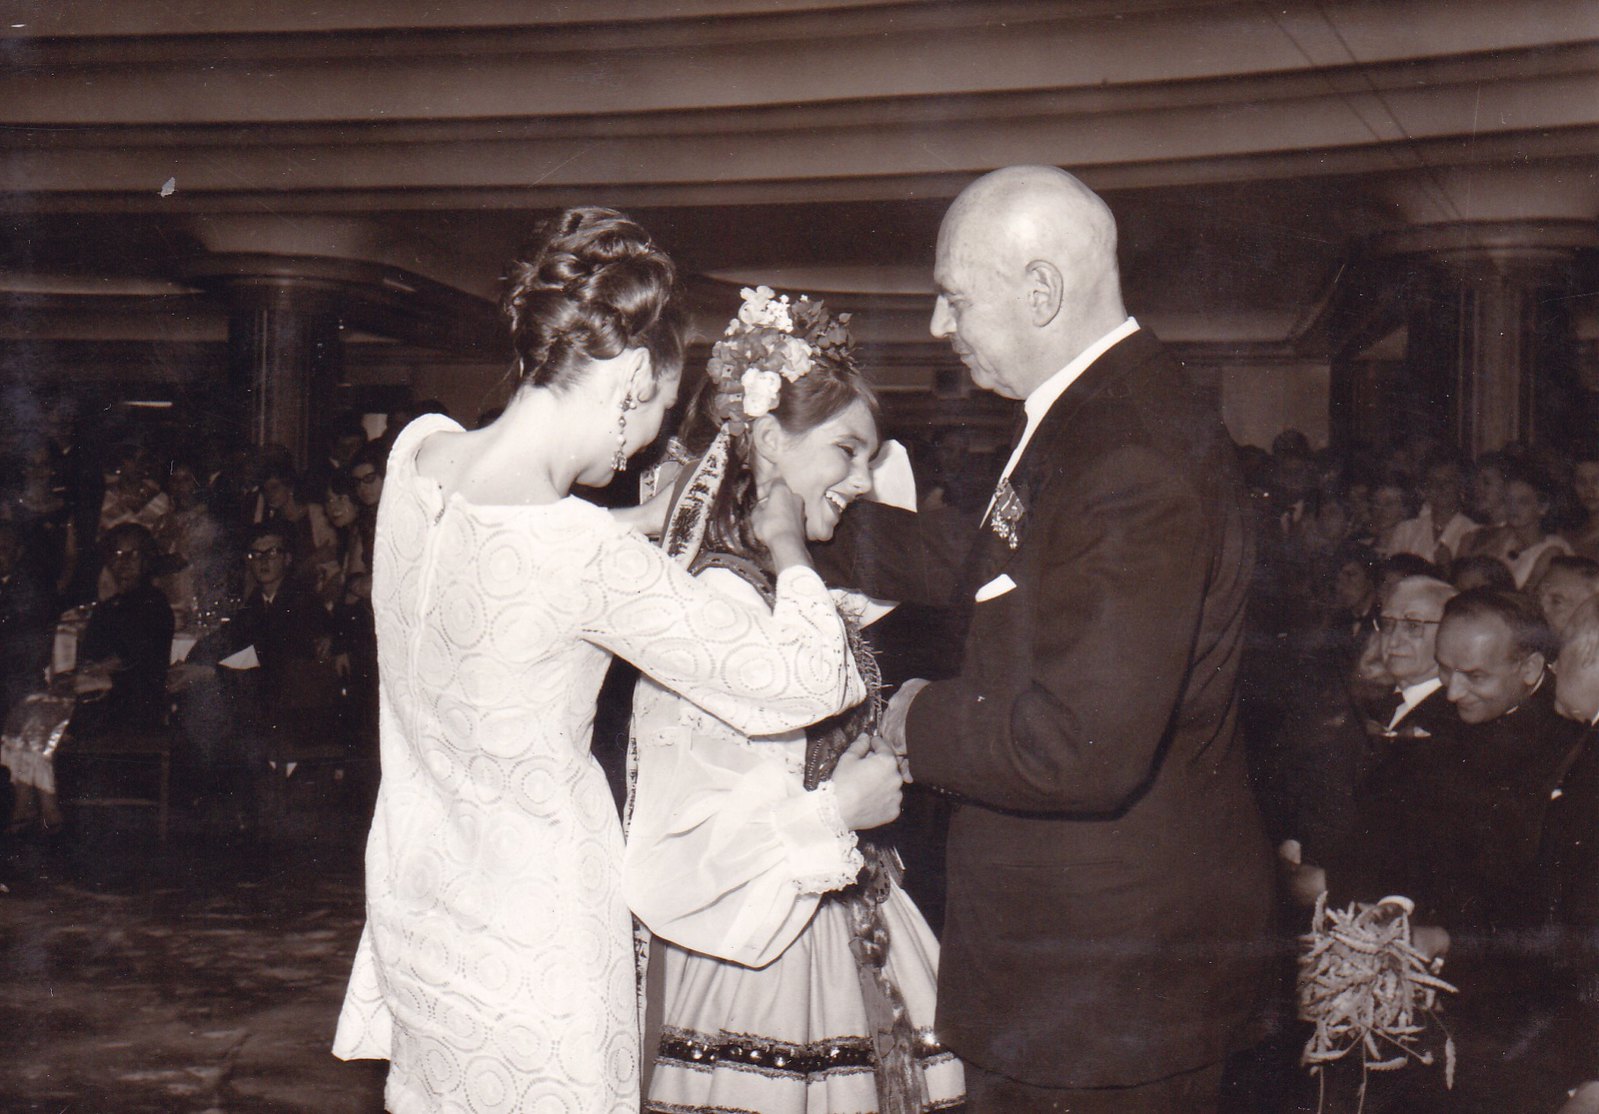 Harvest Ball (Dozynki) at Derry and Toms, 1967